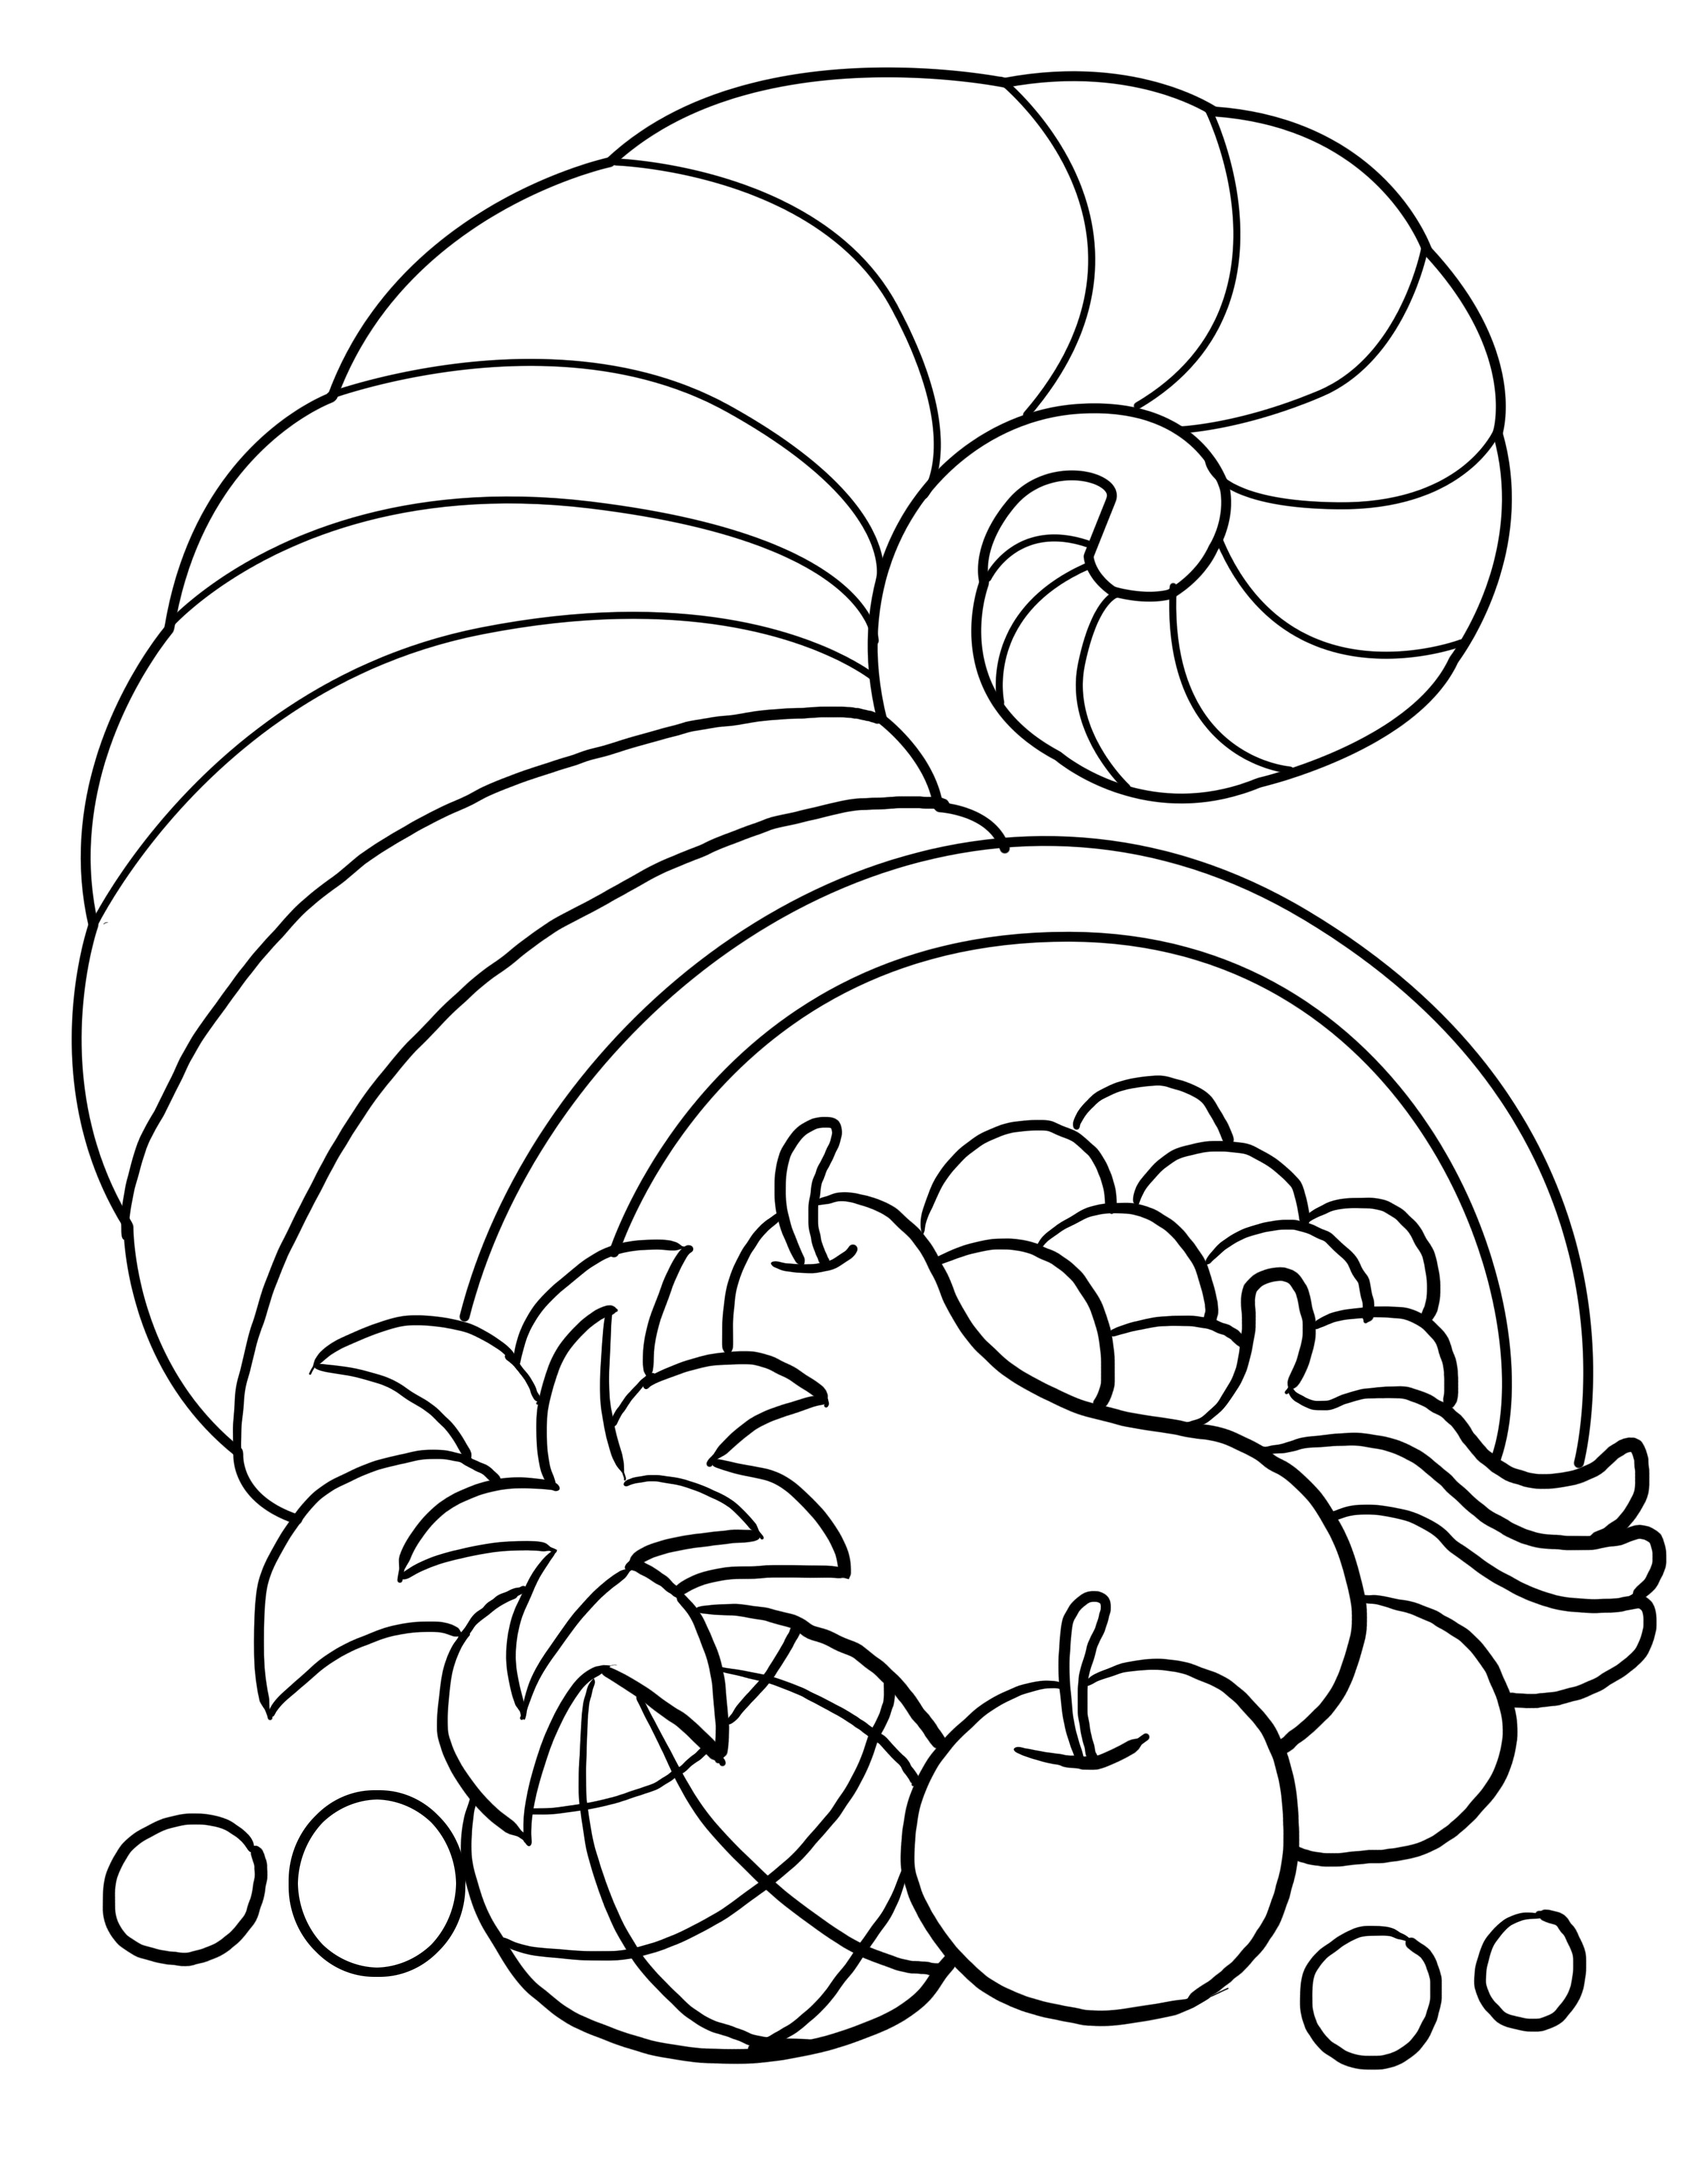 Thanksgiving Turkey Coloring Page
 Thanksgiving Coloring Pages